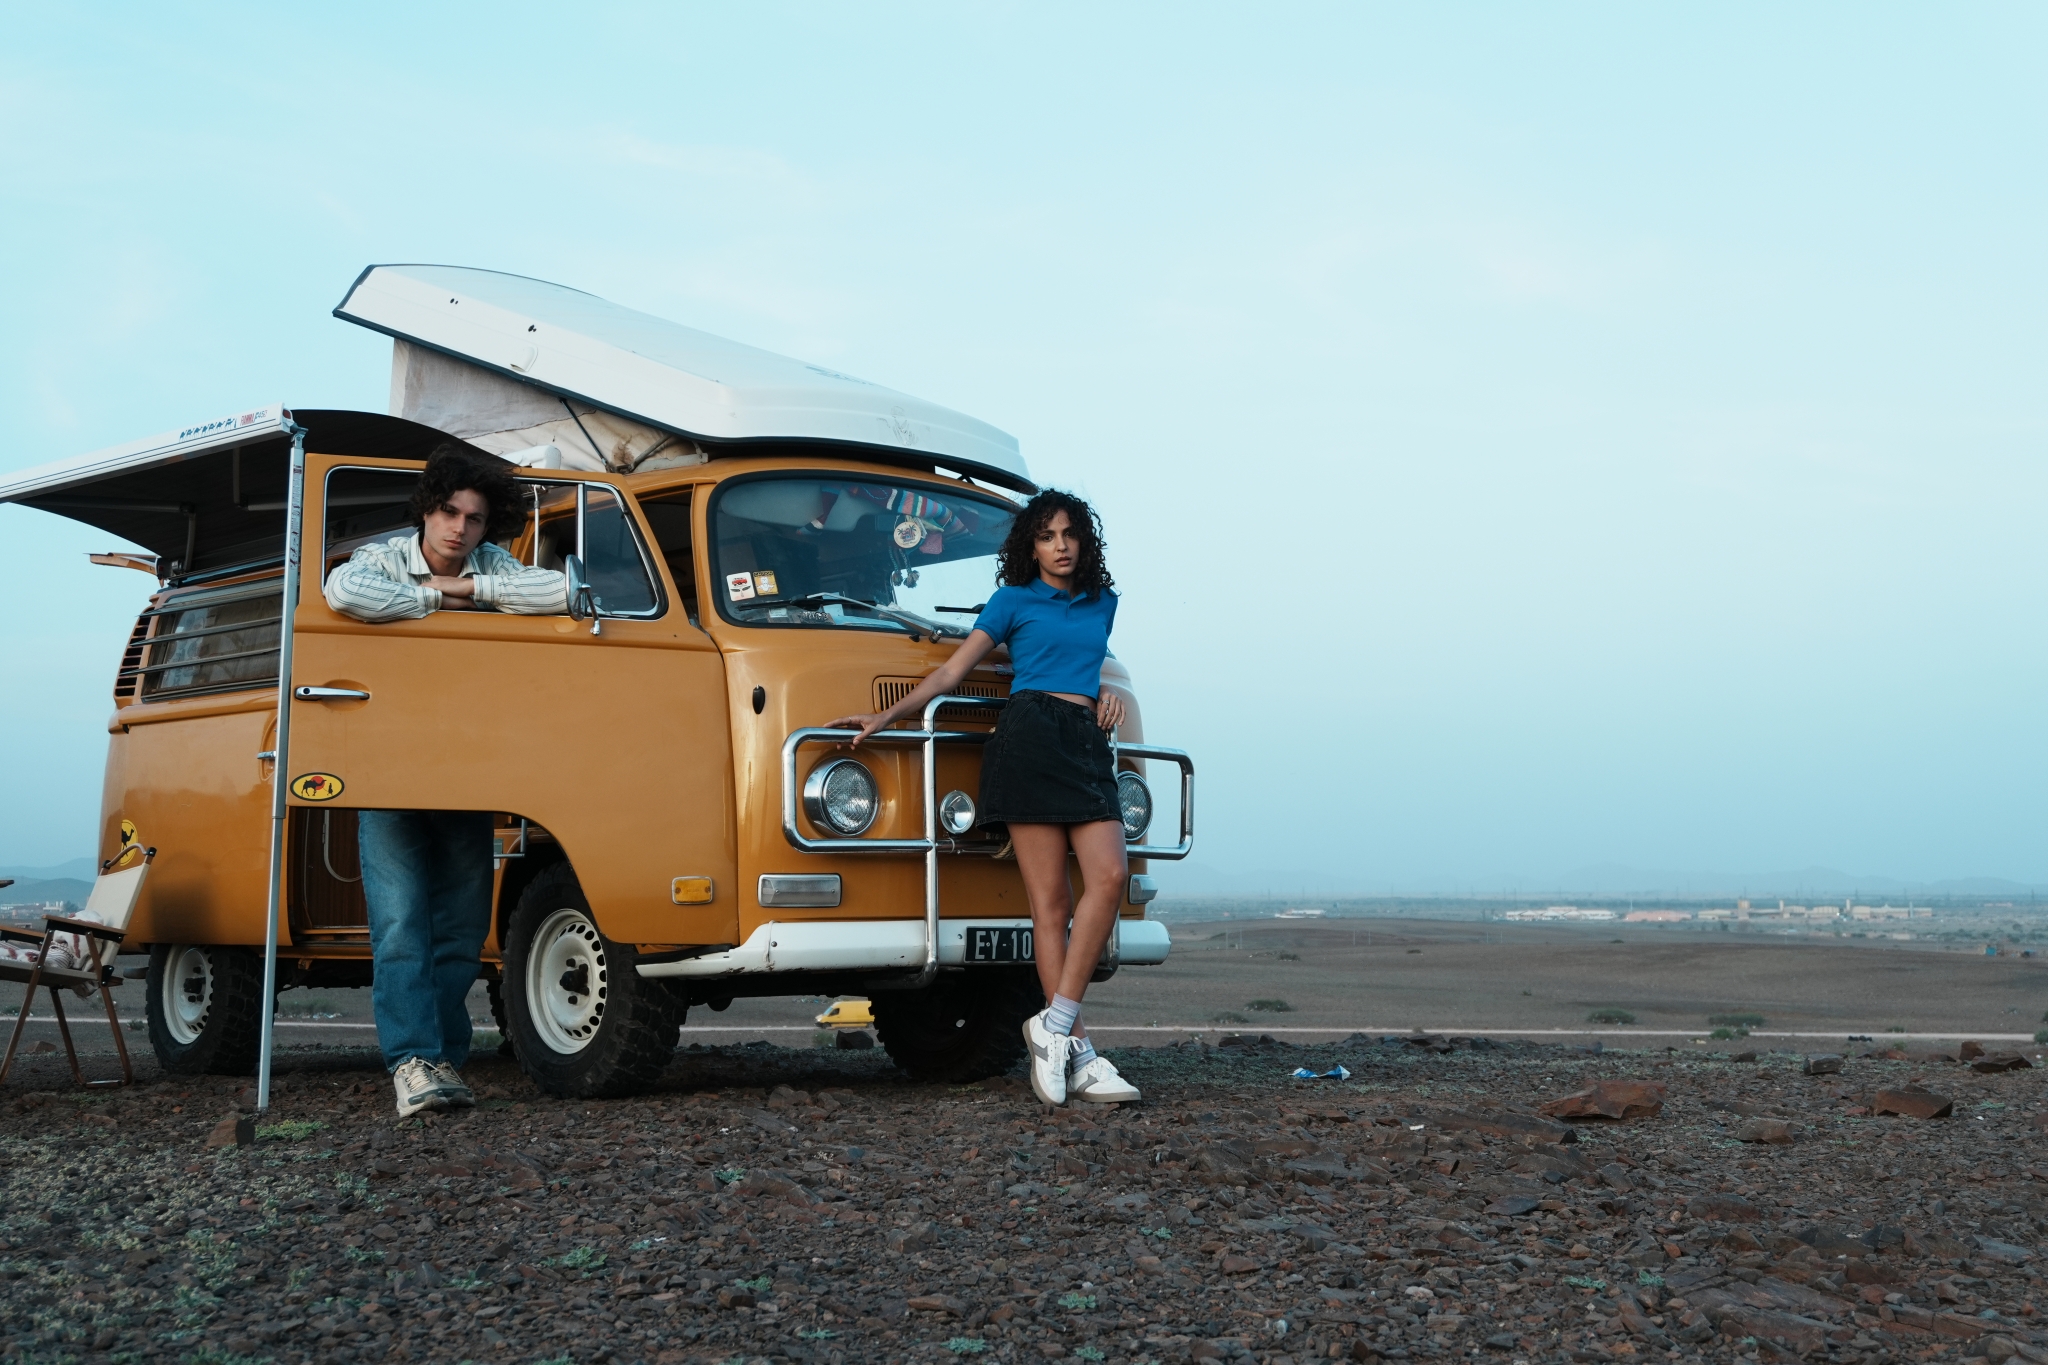 Sample image of a man and a woman leaning against the yellow van Creative Look: Film